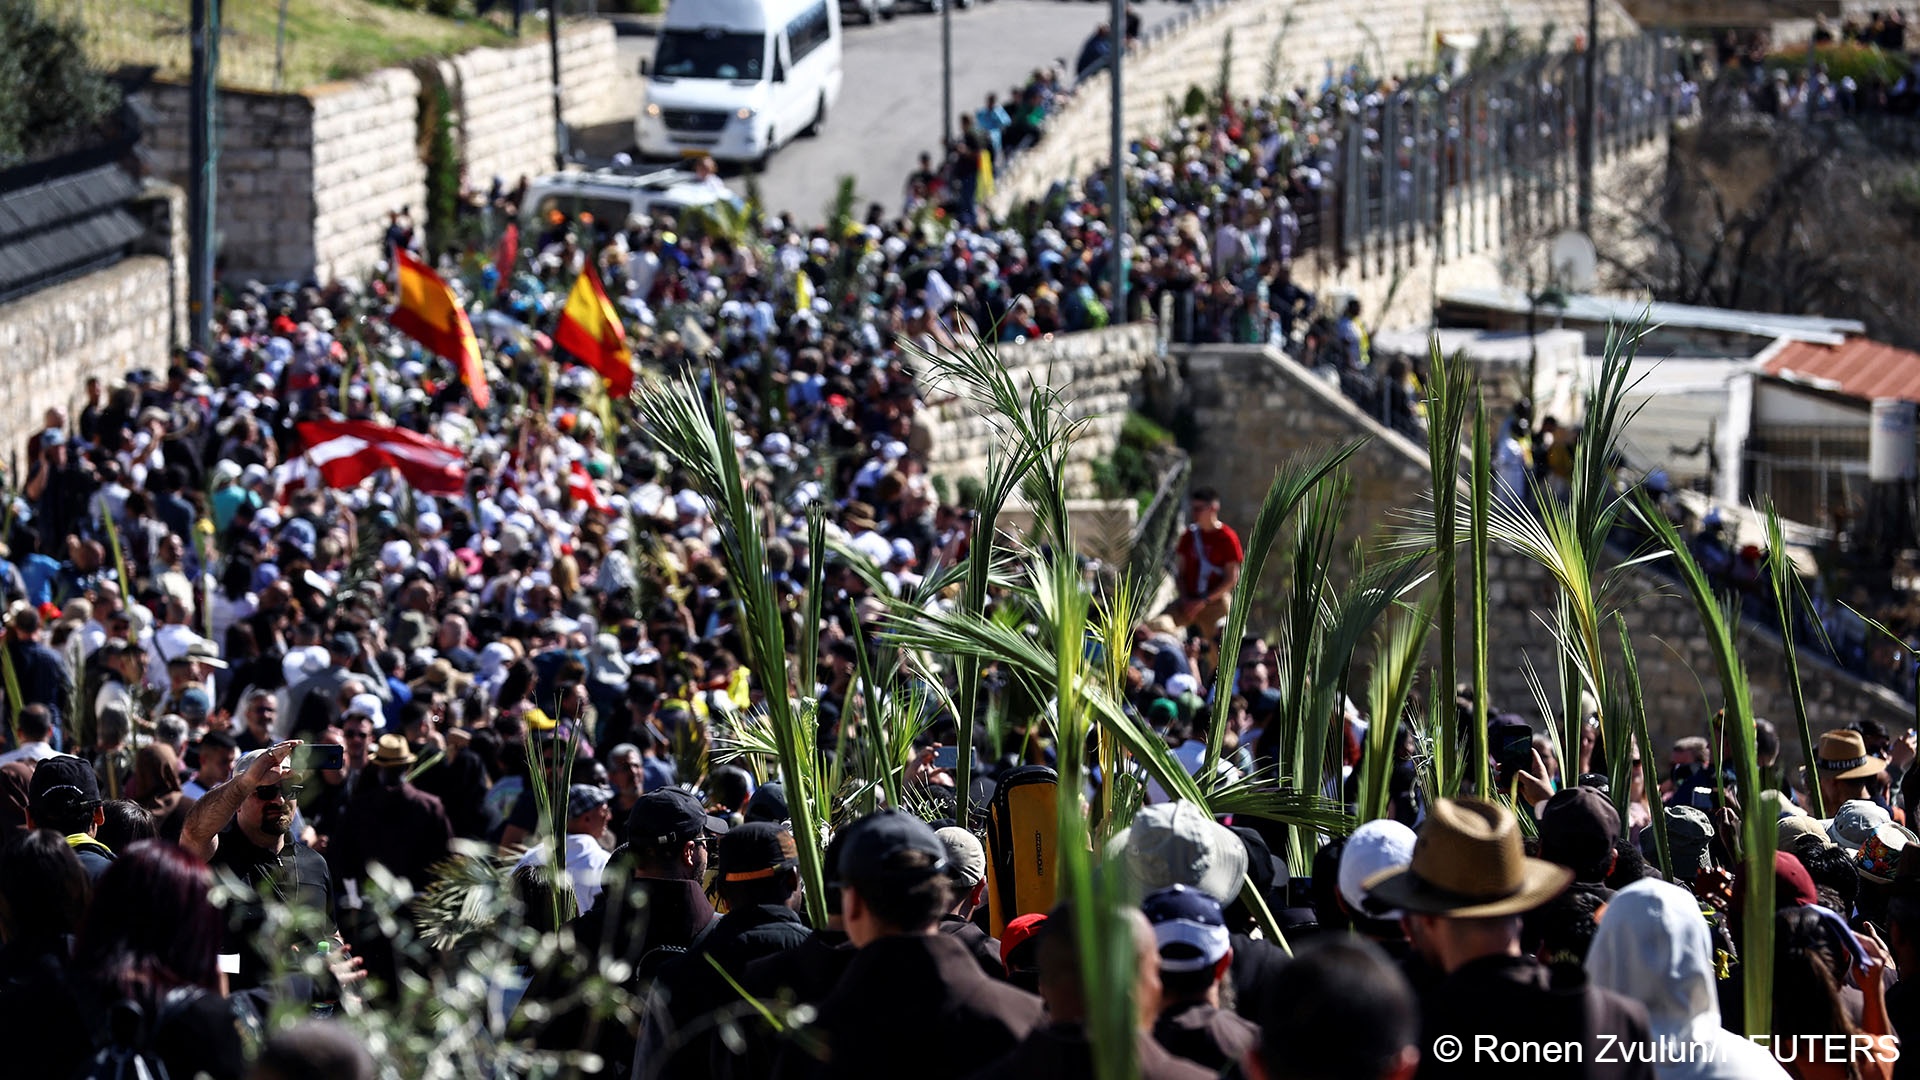 Christian worshippers attend a Palm Sunday procession on the Mount of Olives in Jerusalem, 2 April 2023 (image: REUTERS/Ronen Zvulun) 